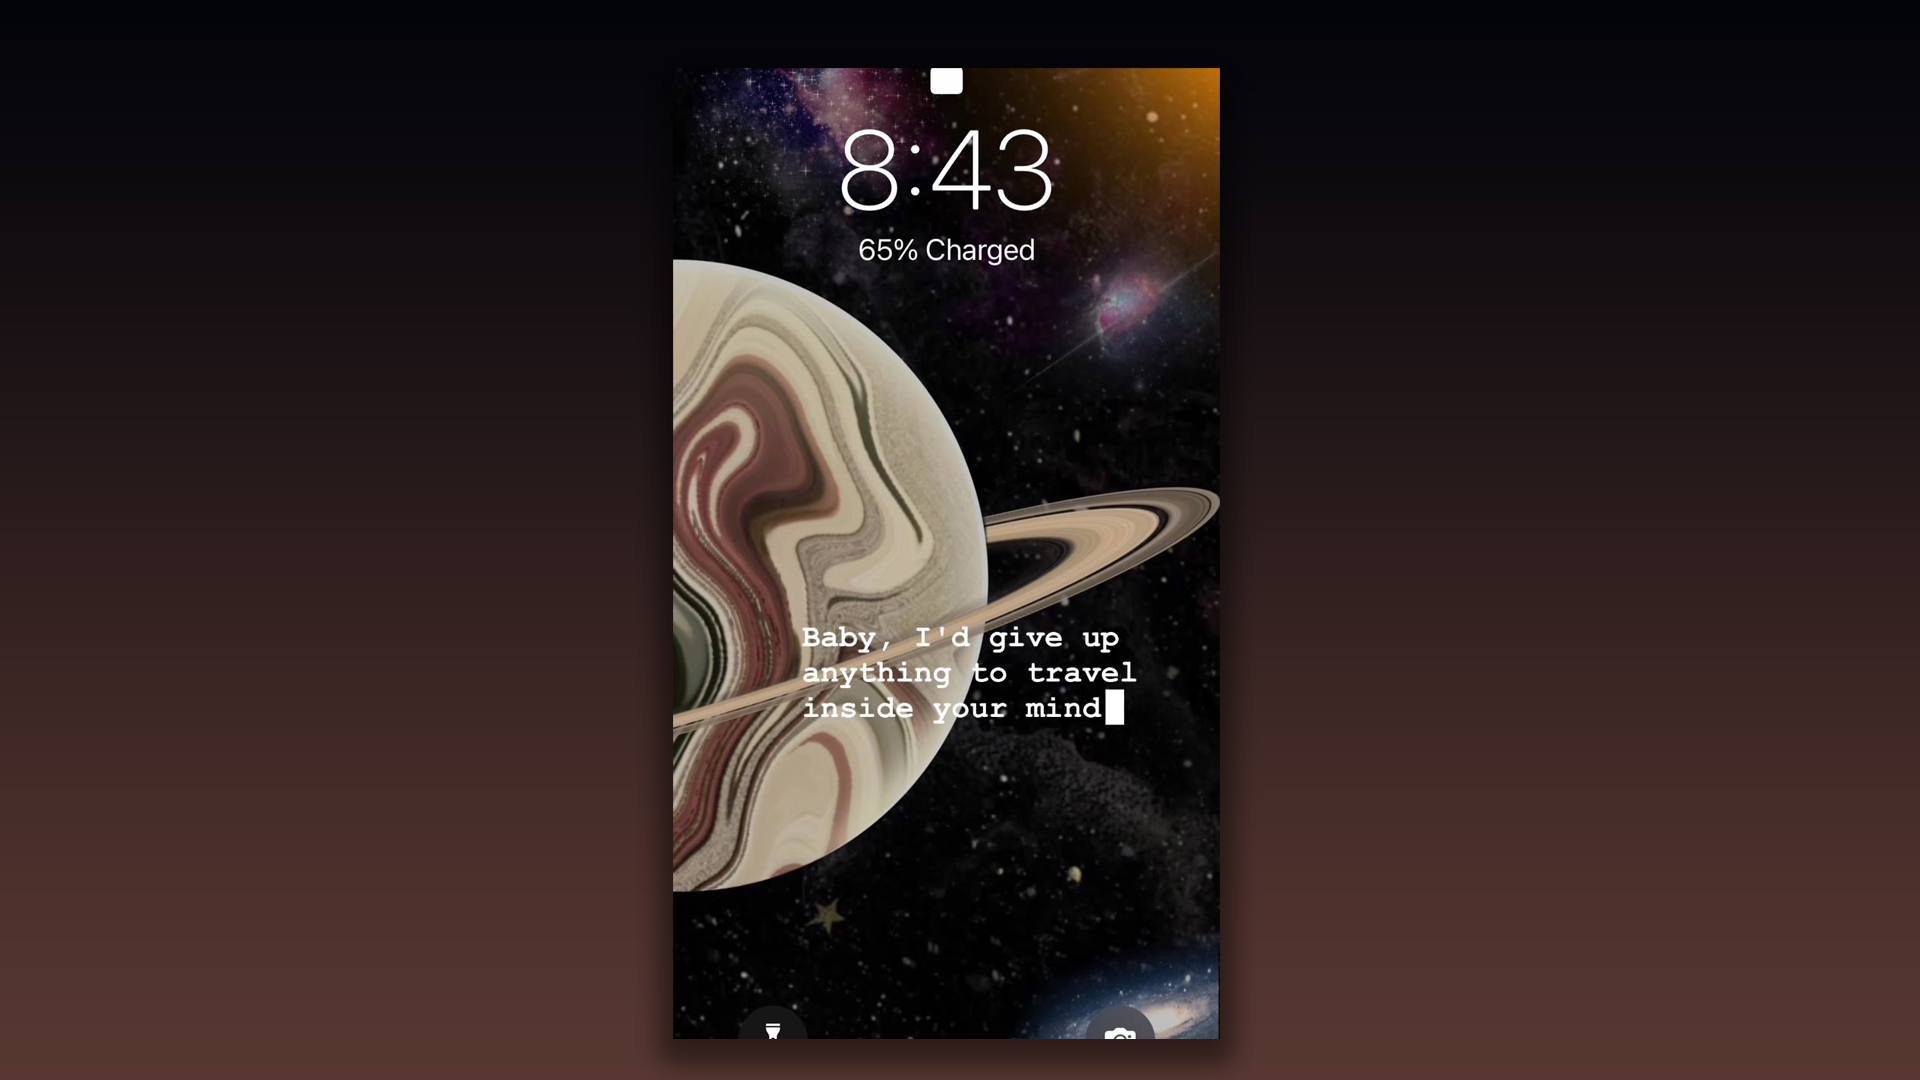 This stunning TikTok planet trend is taking over iPhone lock screens